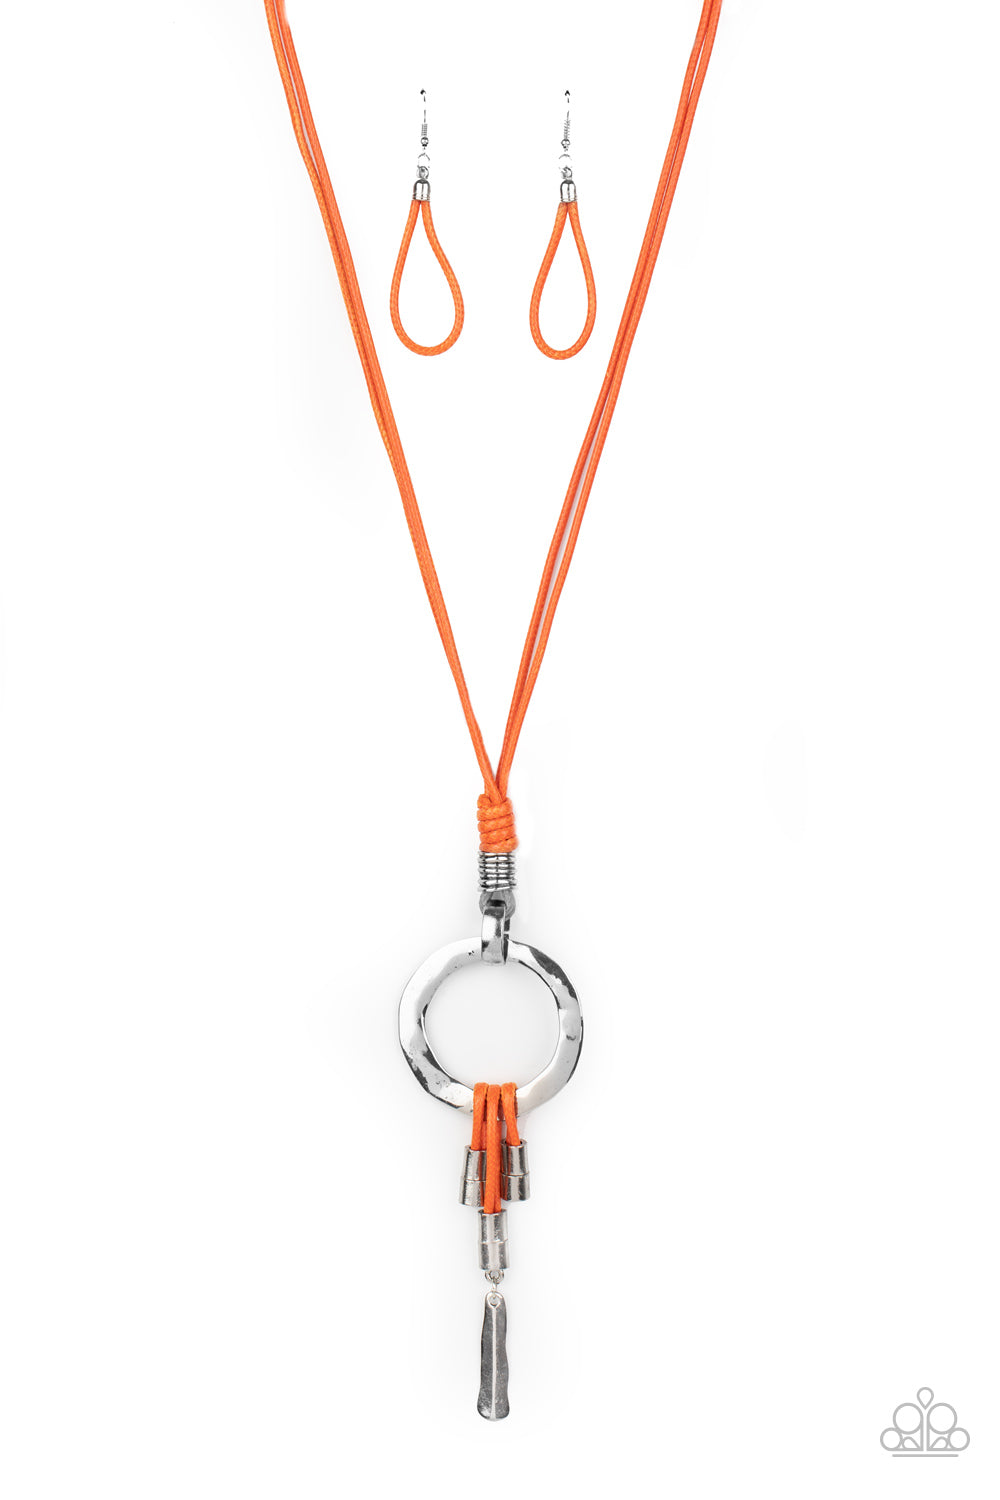 Infused with bold silver beaded accents, pieces of Amberglow cording loop around the bottom of a hammered silver hoop, creating a colorful artisan inspired pendant at the knotted end of lengthened Amberglow cording. Features an adjustable clasp closure.